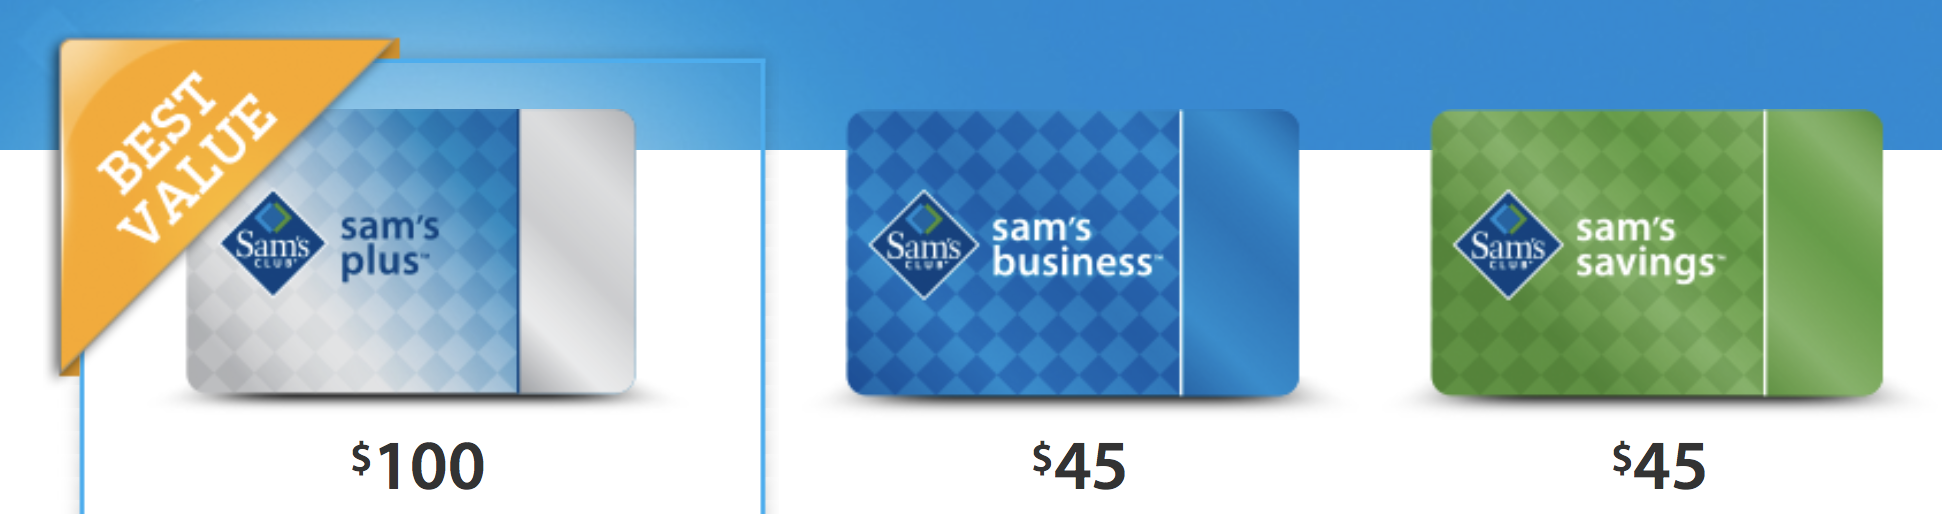 Earn Up To 5,000 AAdvantage Miles With Sam's Club Membership